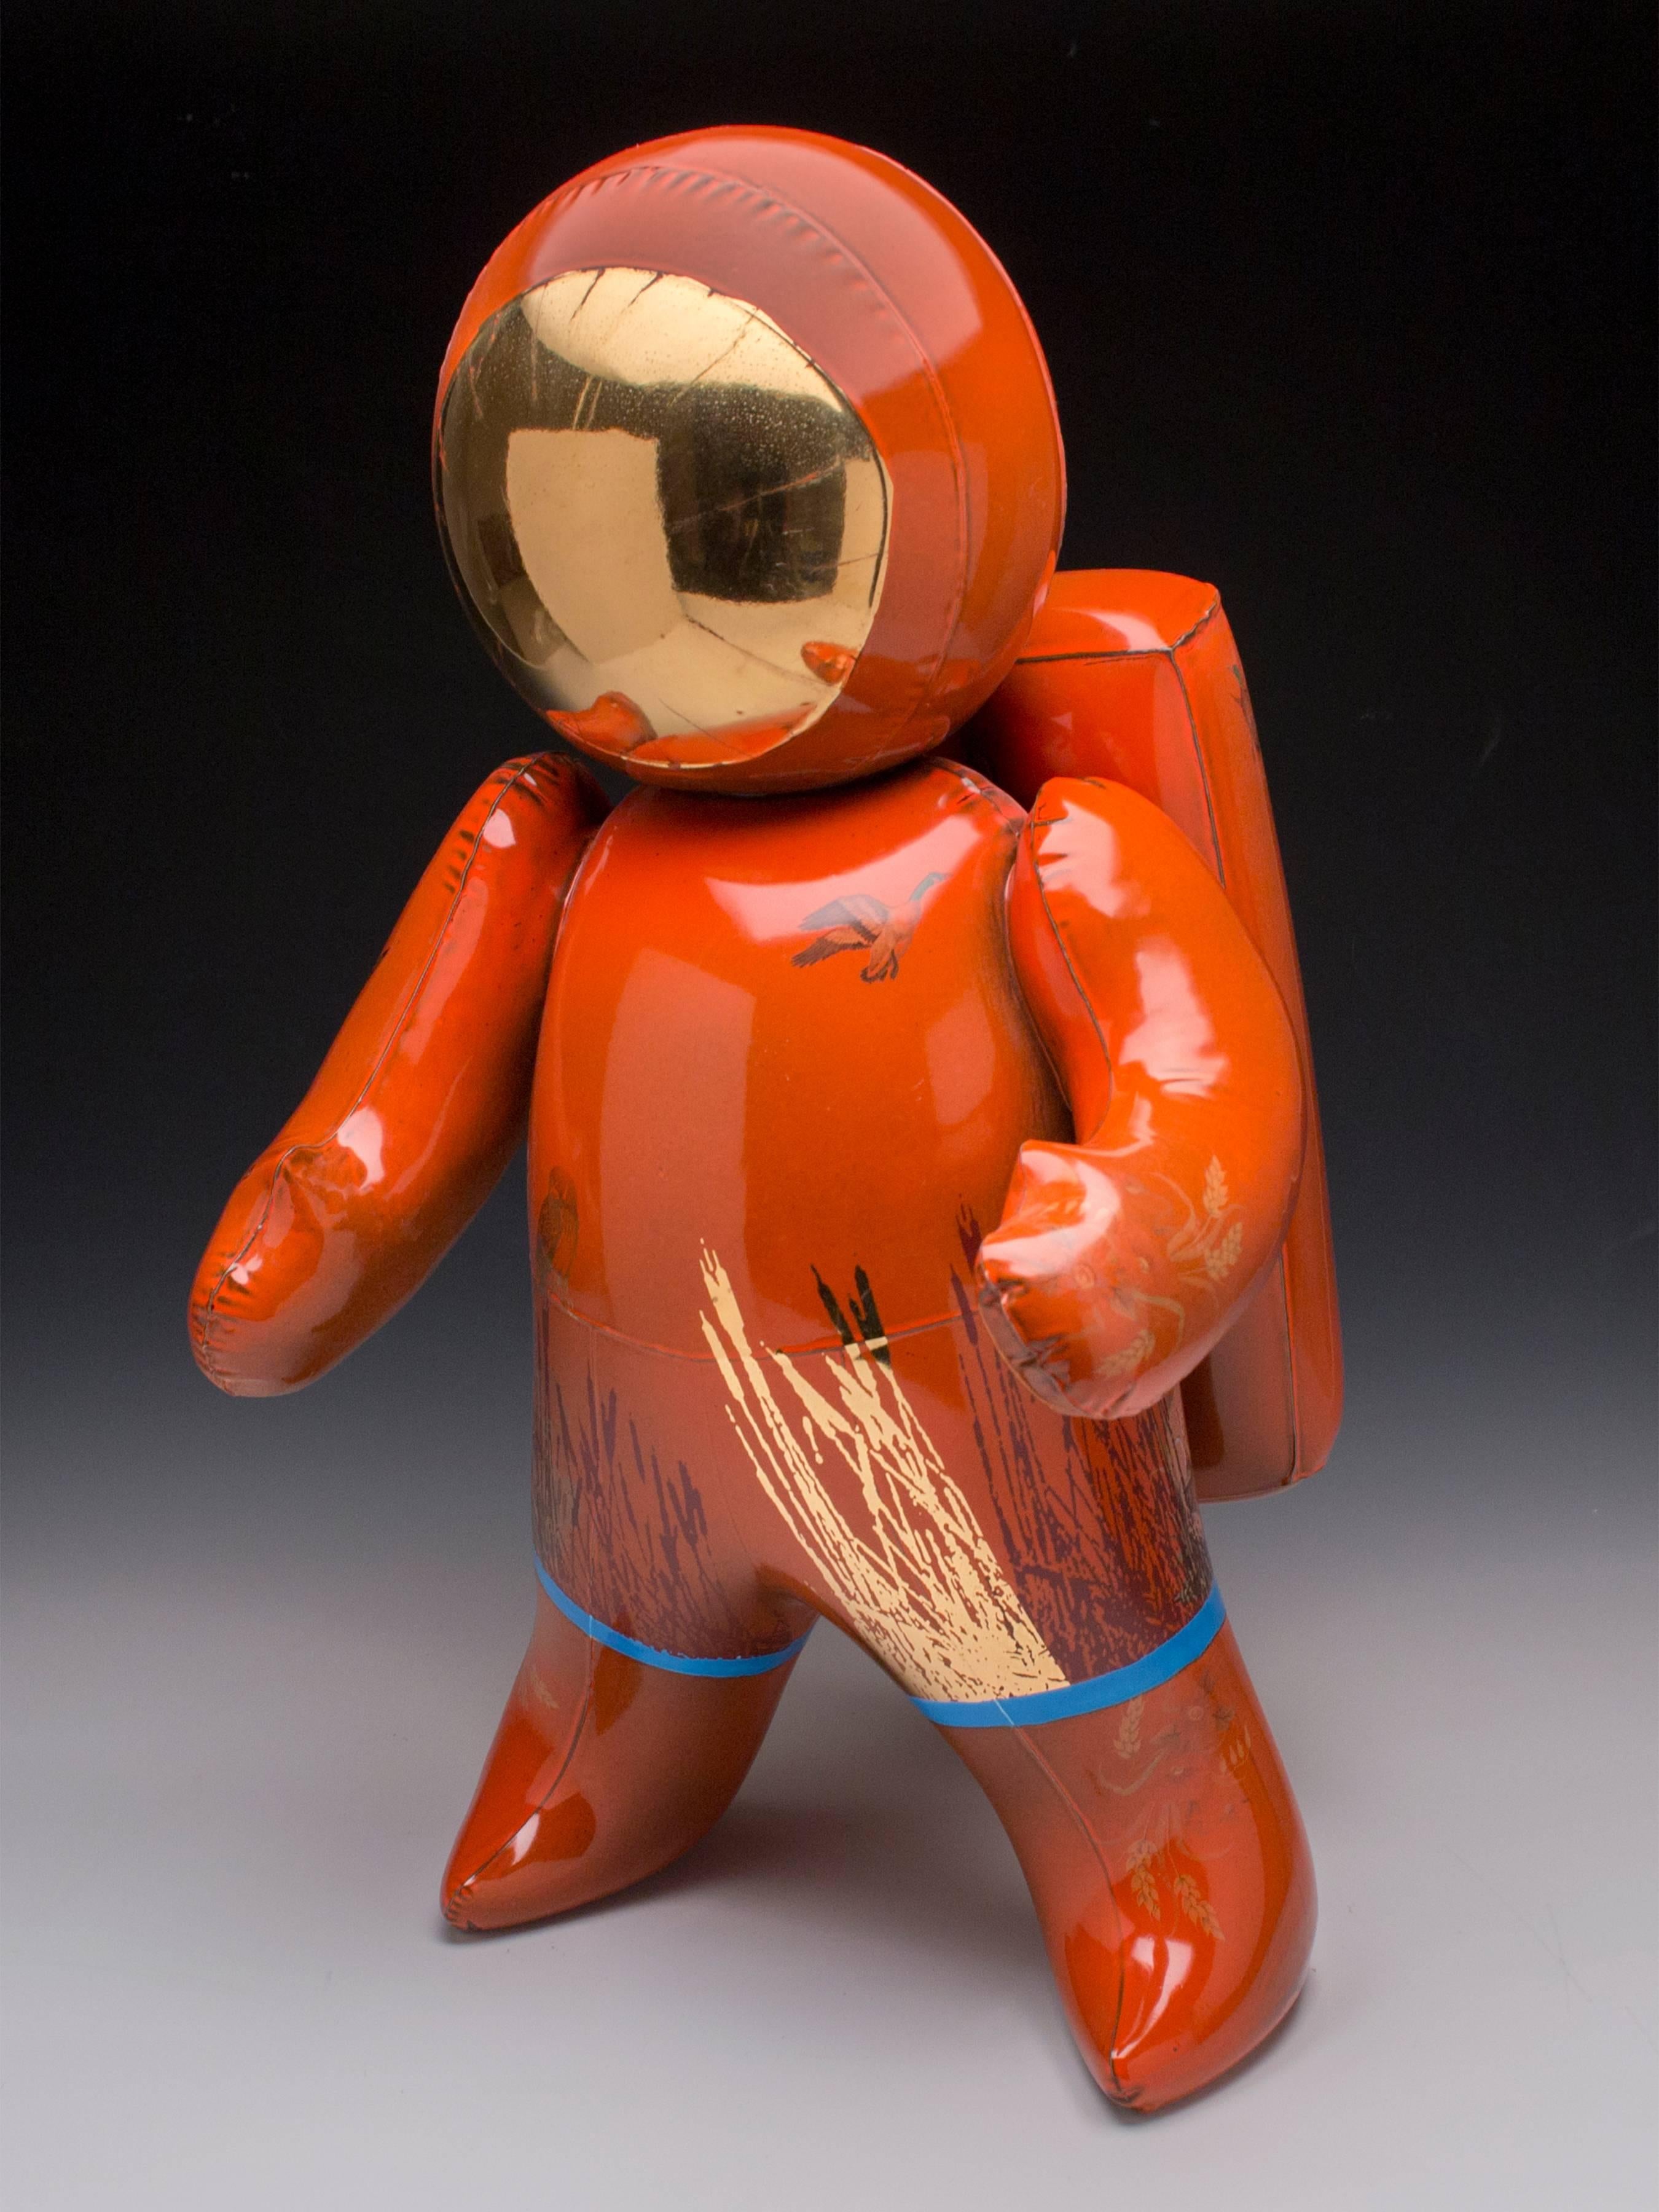 Astronaut (collaboration with Justin Rothshank) - Sculpture by Brett Kern